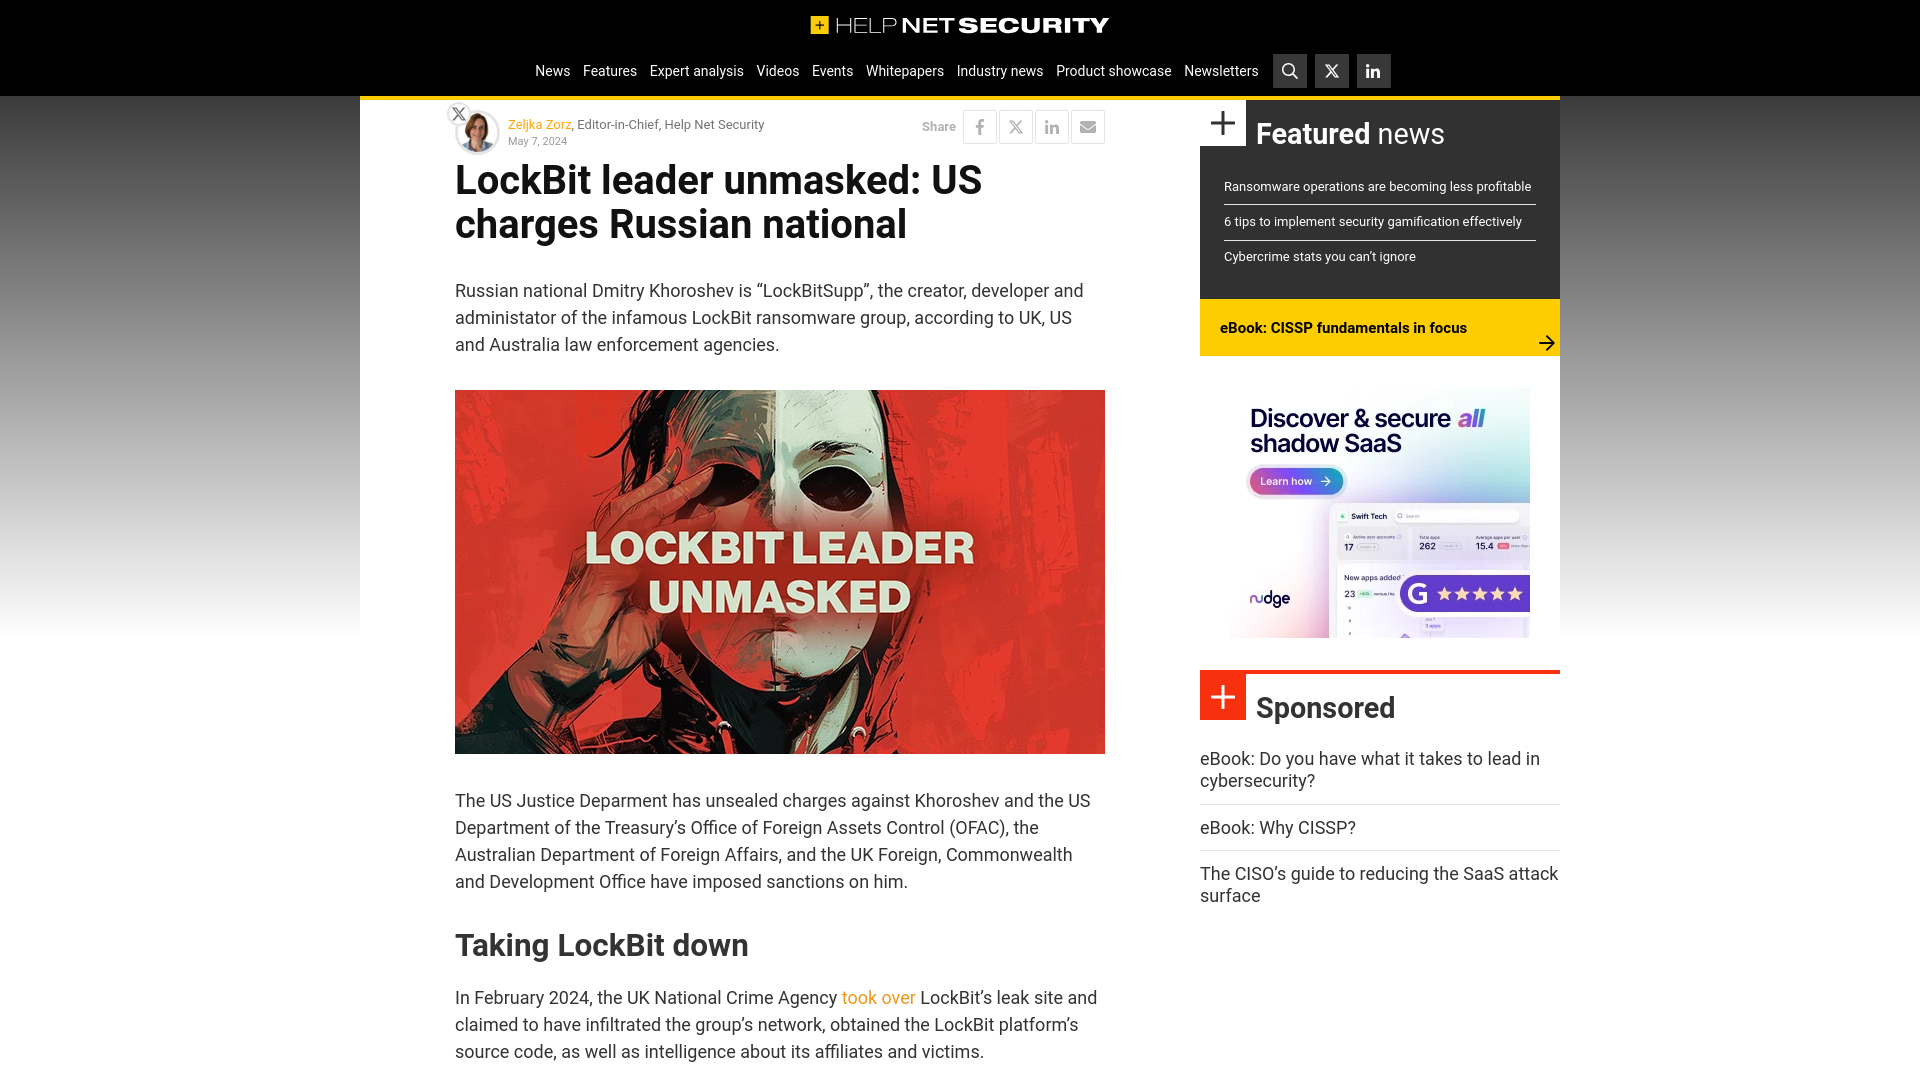 LockBit leader unmasked: US charges Russian national - Help Net Security